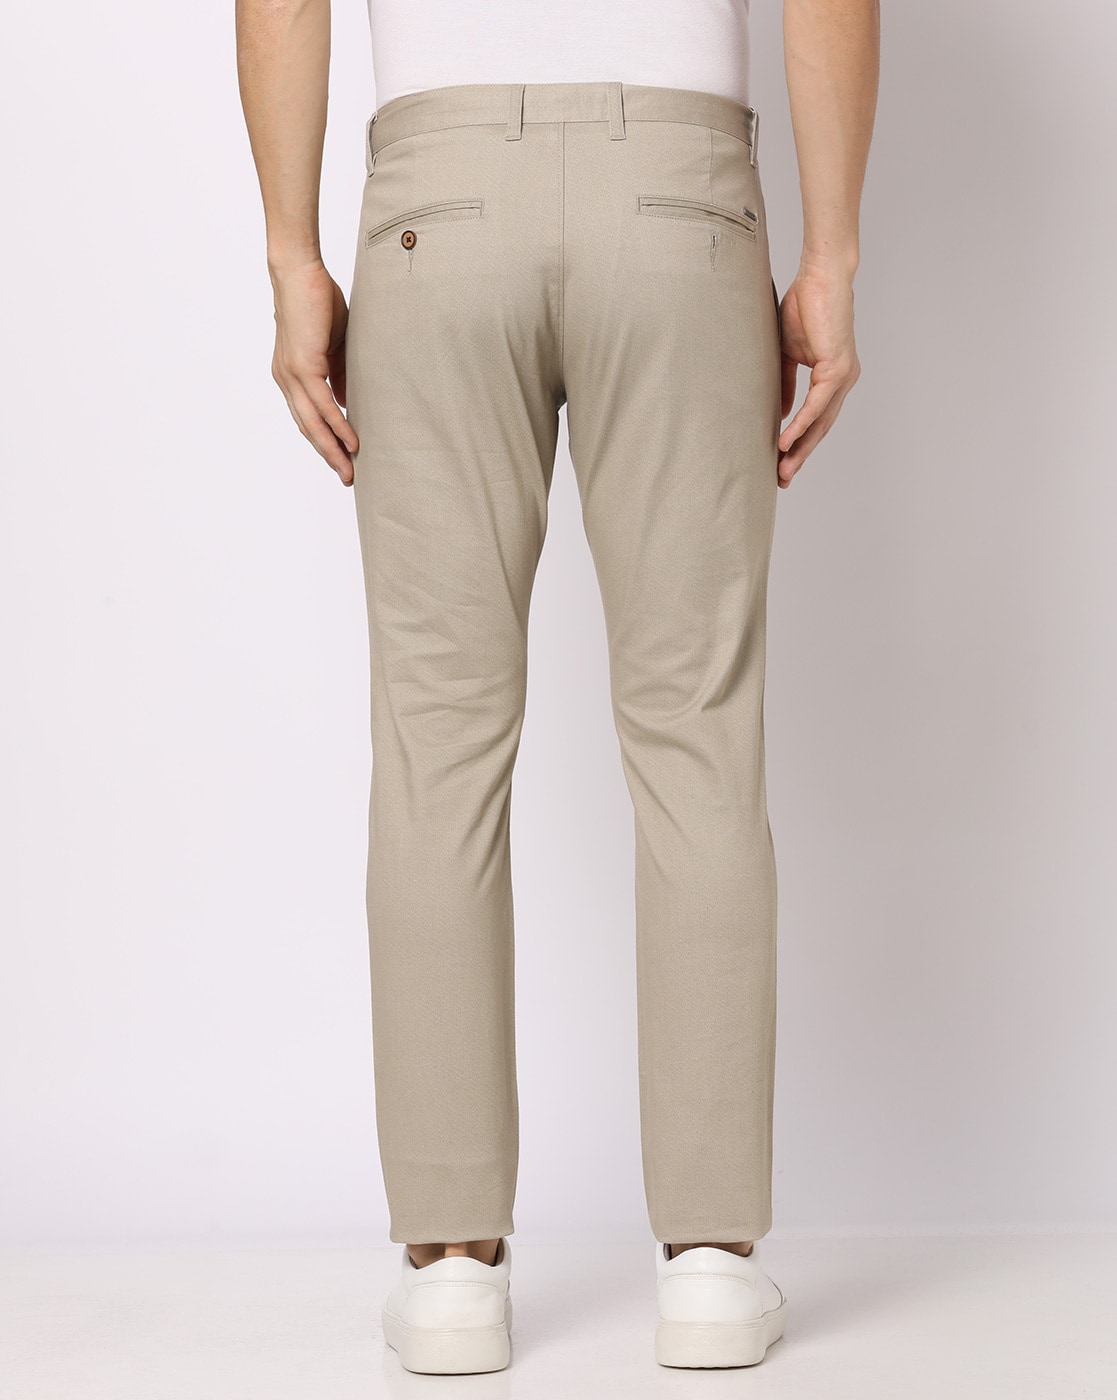 Classic Mens Corduroy Trousers | Needlecord & Fine Cord Trousers US